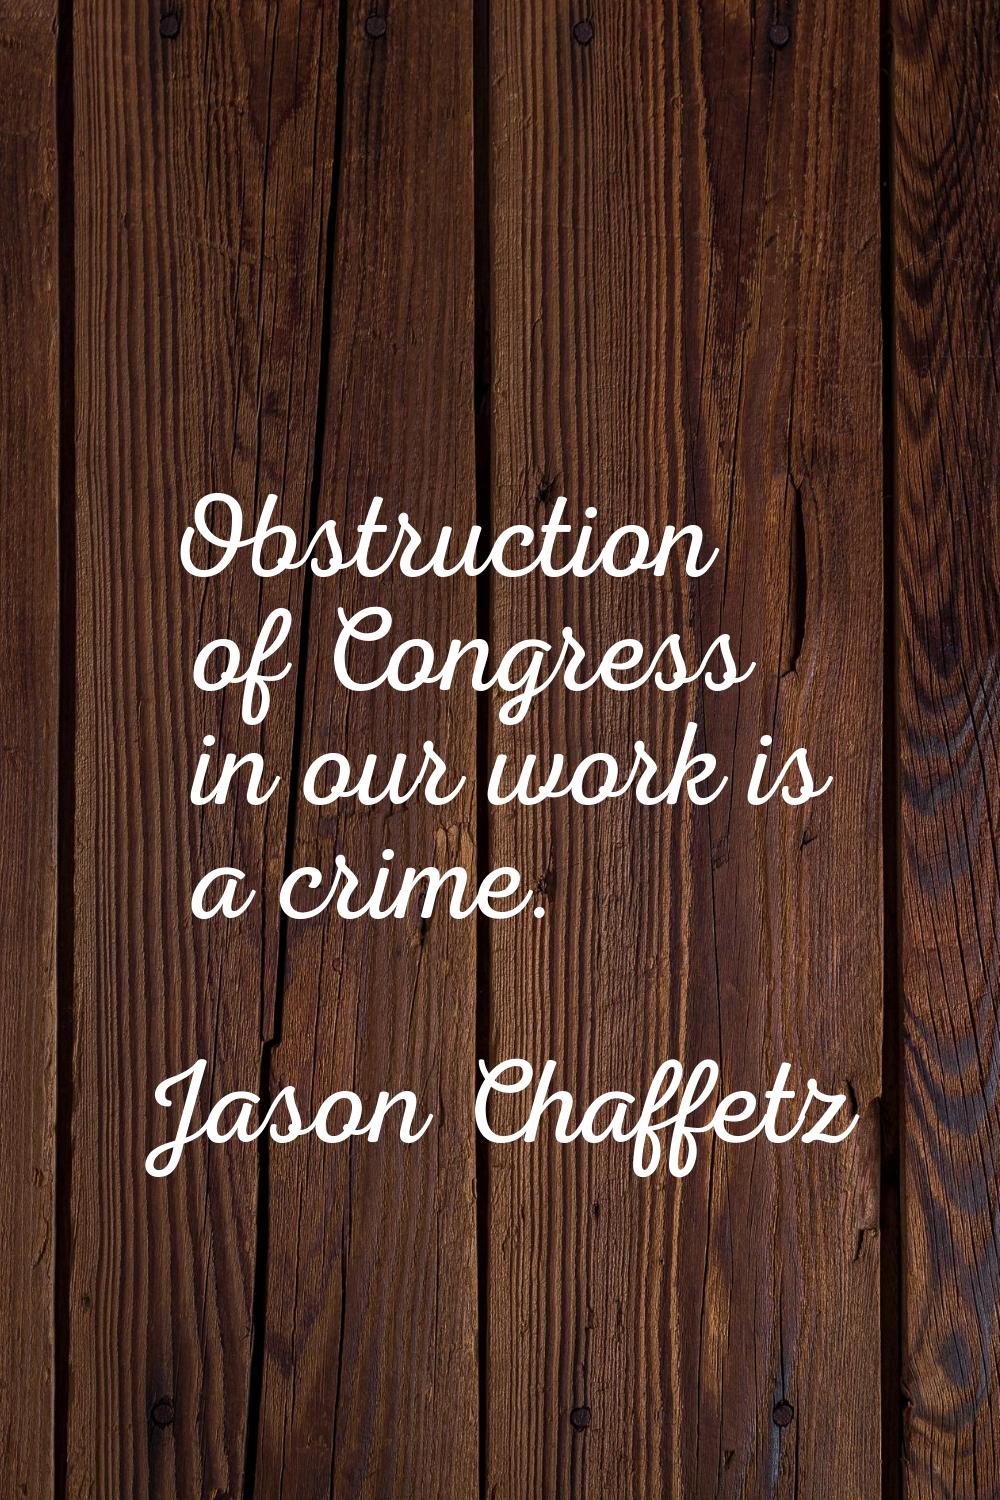 Obstruction of Congress in our work is a crime.